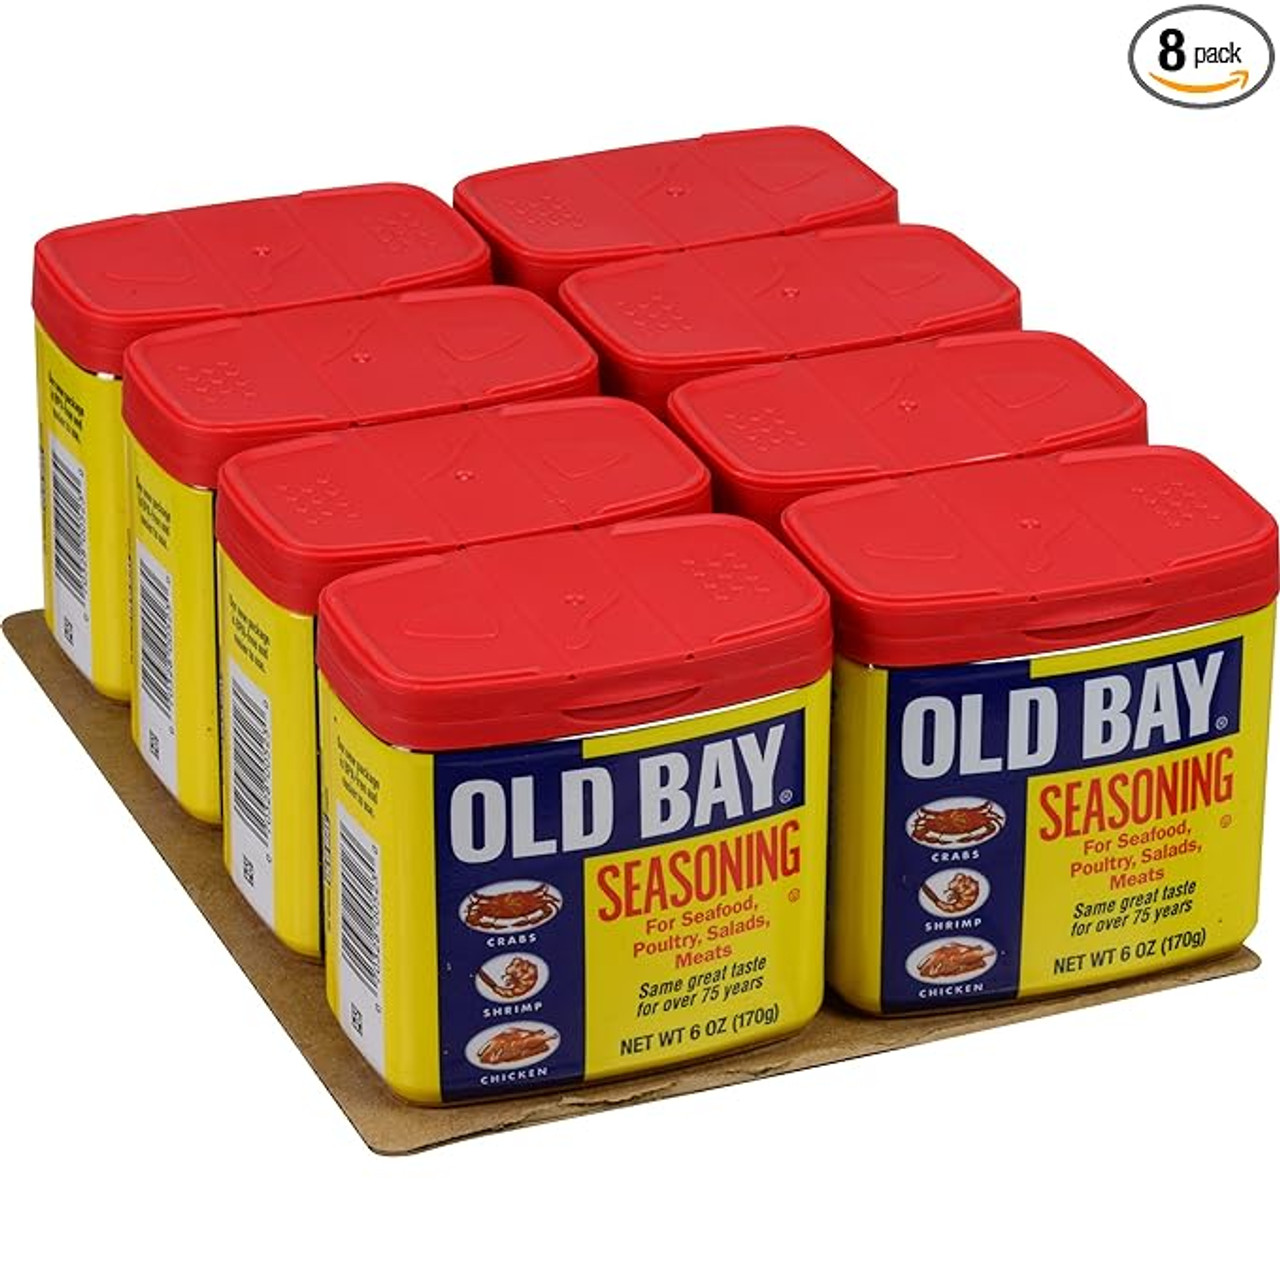 Old Bay 6 oz. Seasoning - 8/Case - Iconic Blend of 18 Herbs and Spices - Chicken Pieces